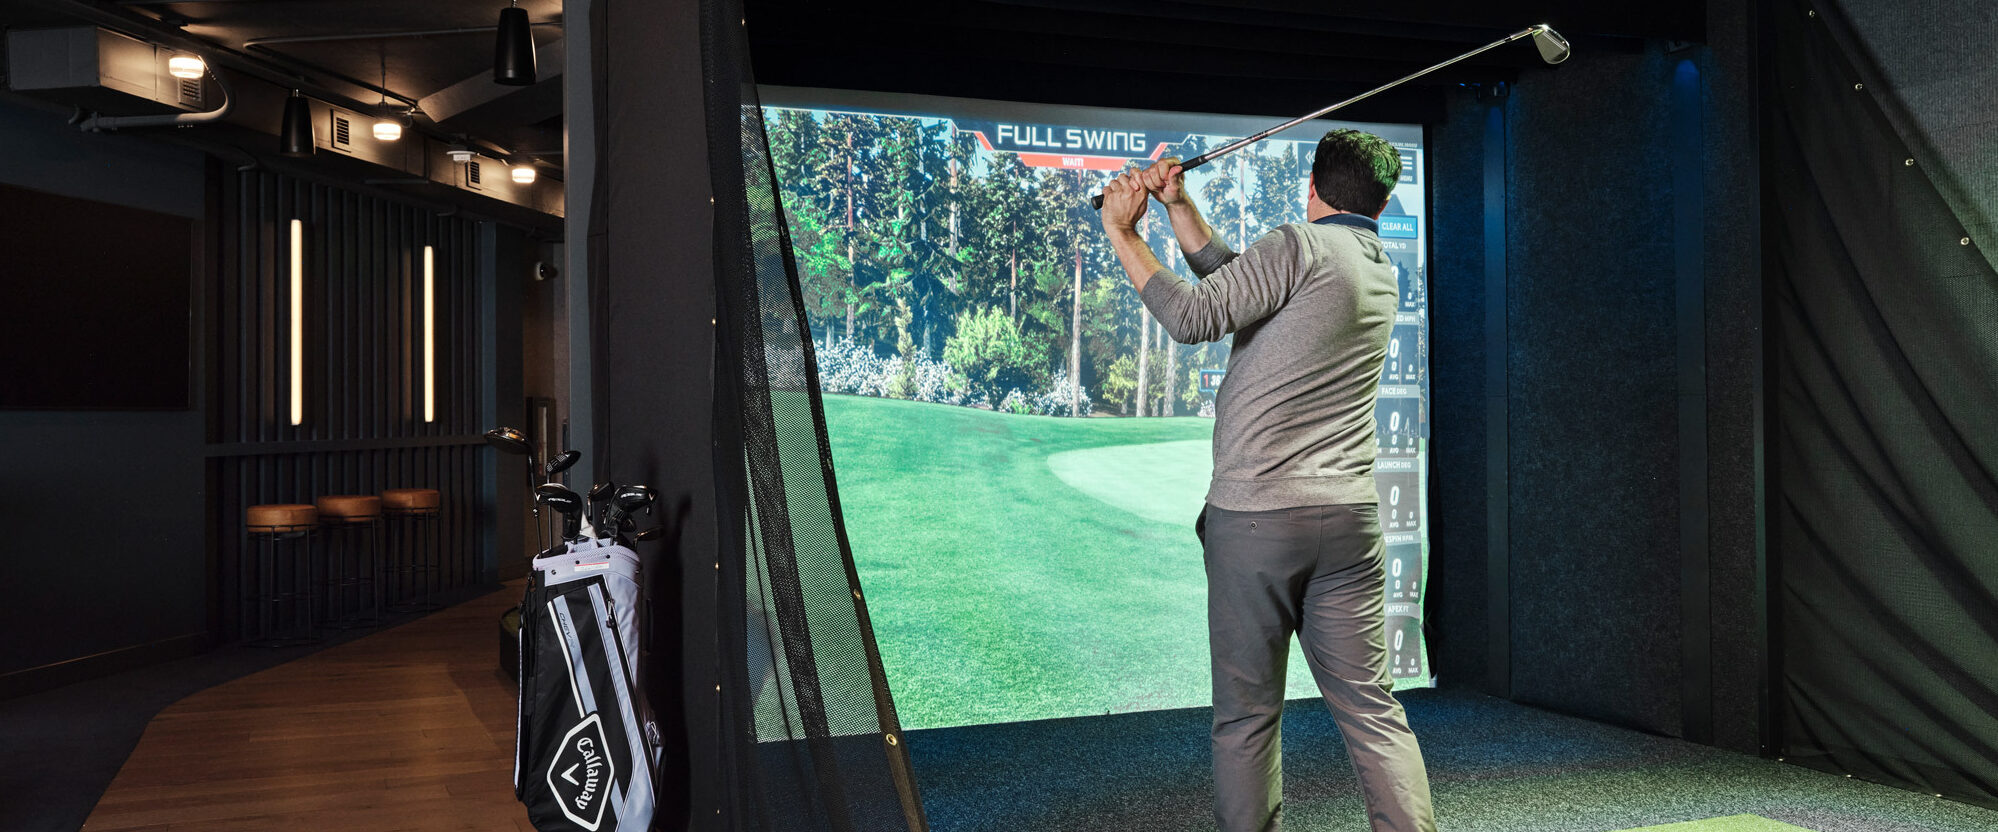 Man practices golf swing in a state-of-the-art indoor simulator space, set against a high-resolution screen displaying a virtual golf course. The room is accented with industrial-style lighting, dark ceiling, and minimalist decor, emphasizing the fusion of technology and comfort in contemporary interior design.